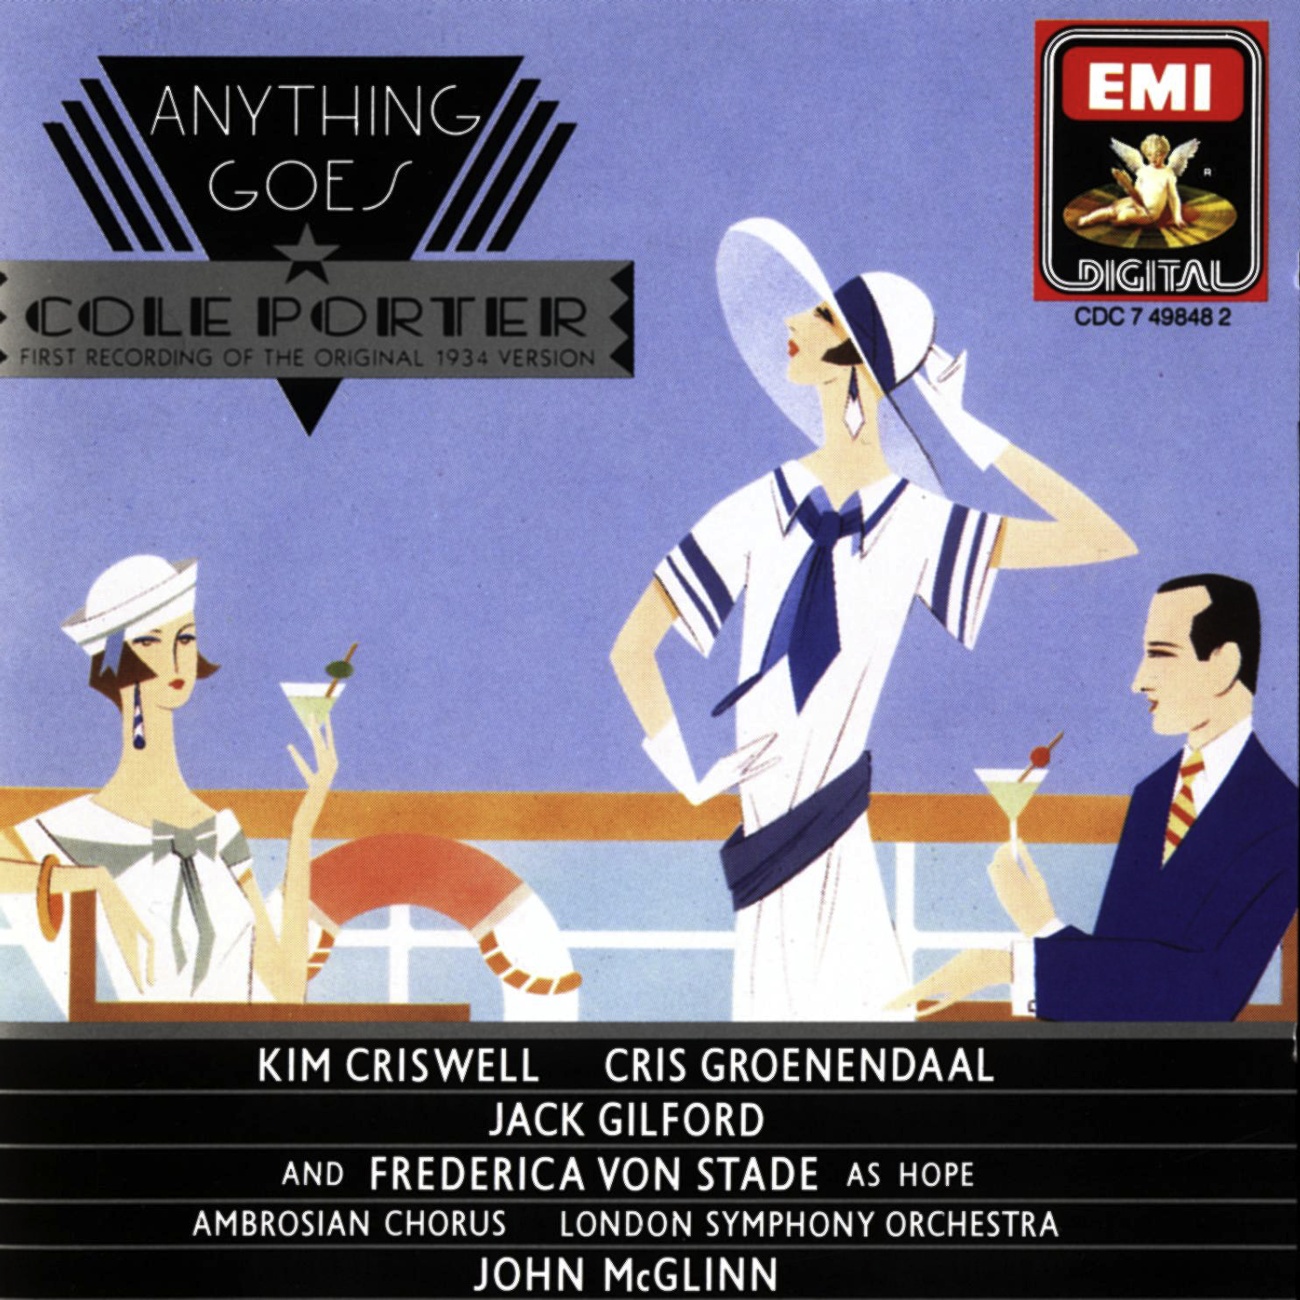 Anything Goes (original 1934 version), Act I: I get a kick out of you (Reno)